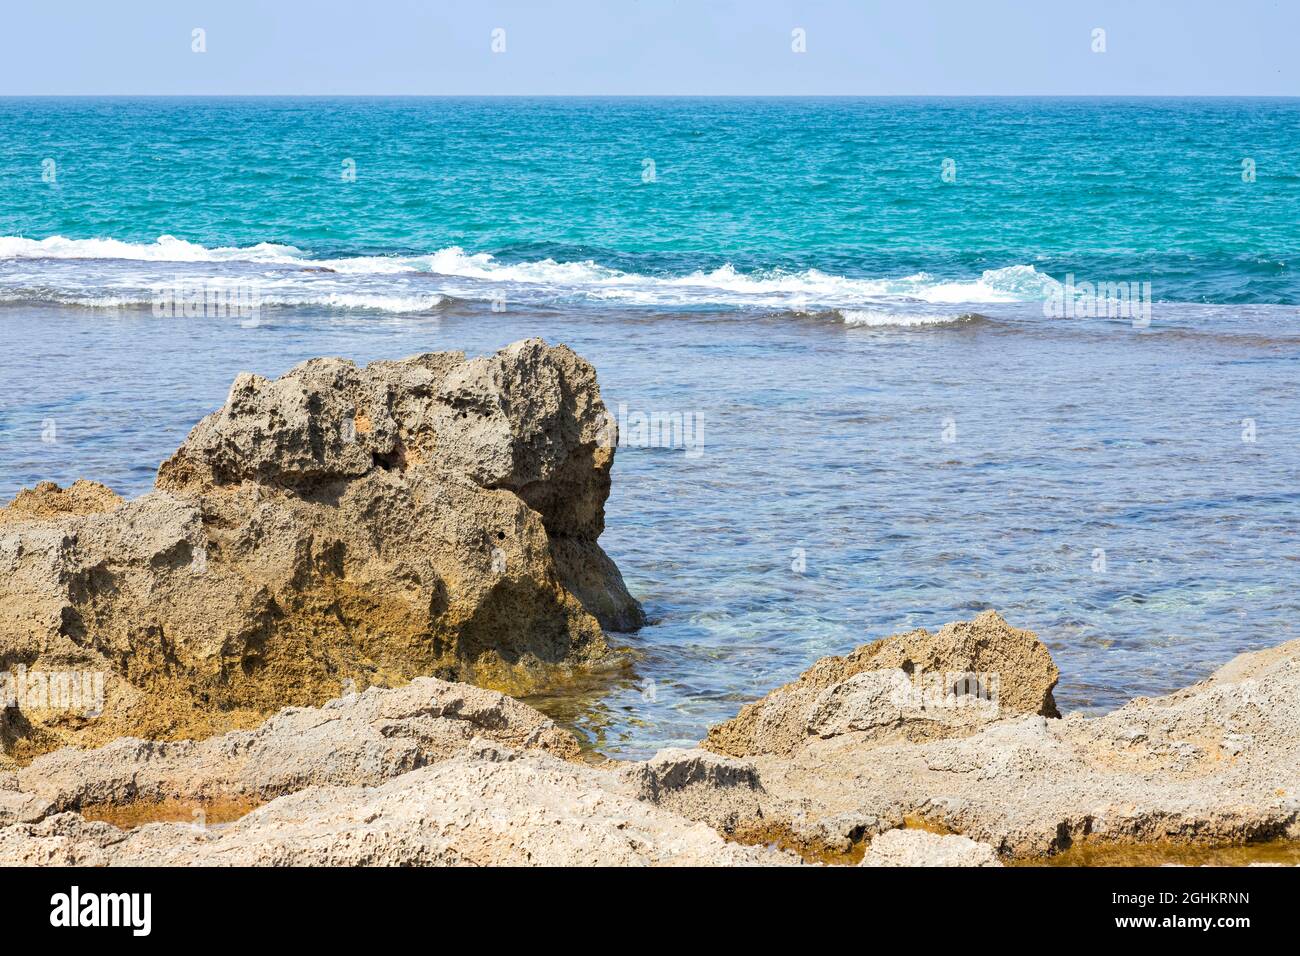 View of sandstone formations on the Mediterranean sea coast at low tide. Israel Stock Photo